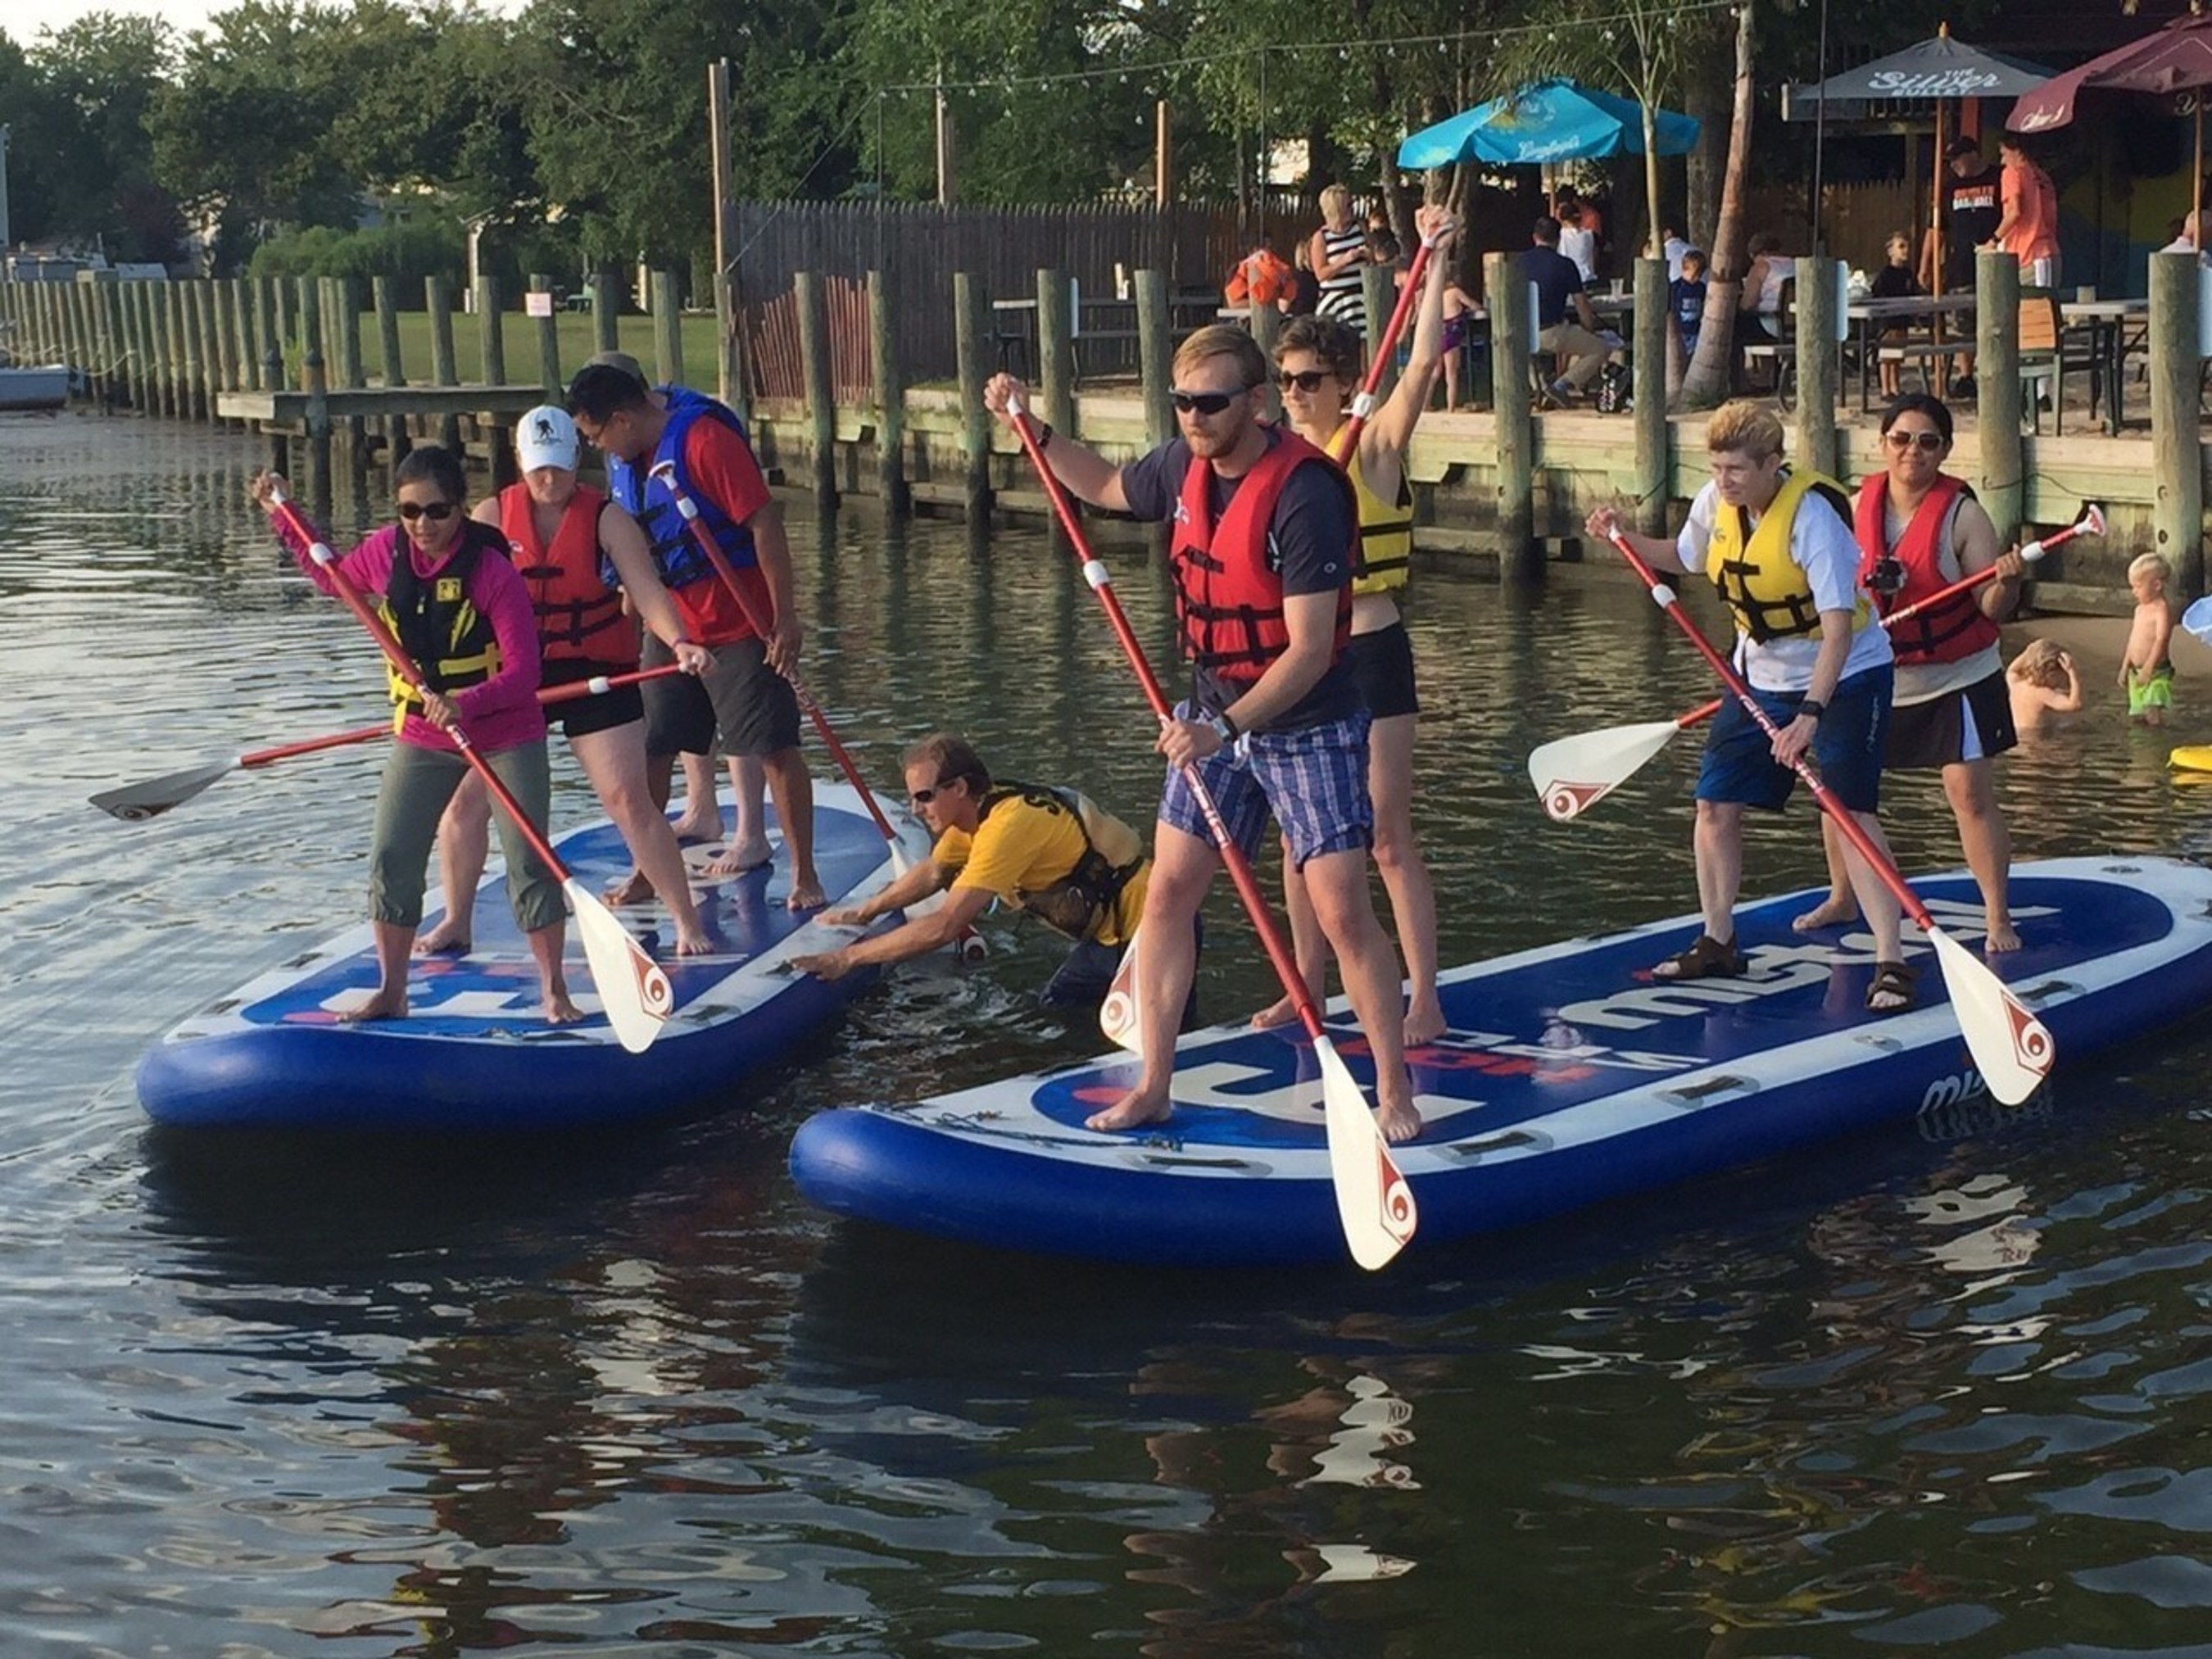 Wounded warriors recently prepared for a monster stand-up paddleboarding competition at a program gathering with Wounded Warrior Project in Middle River, Maryland.